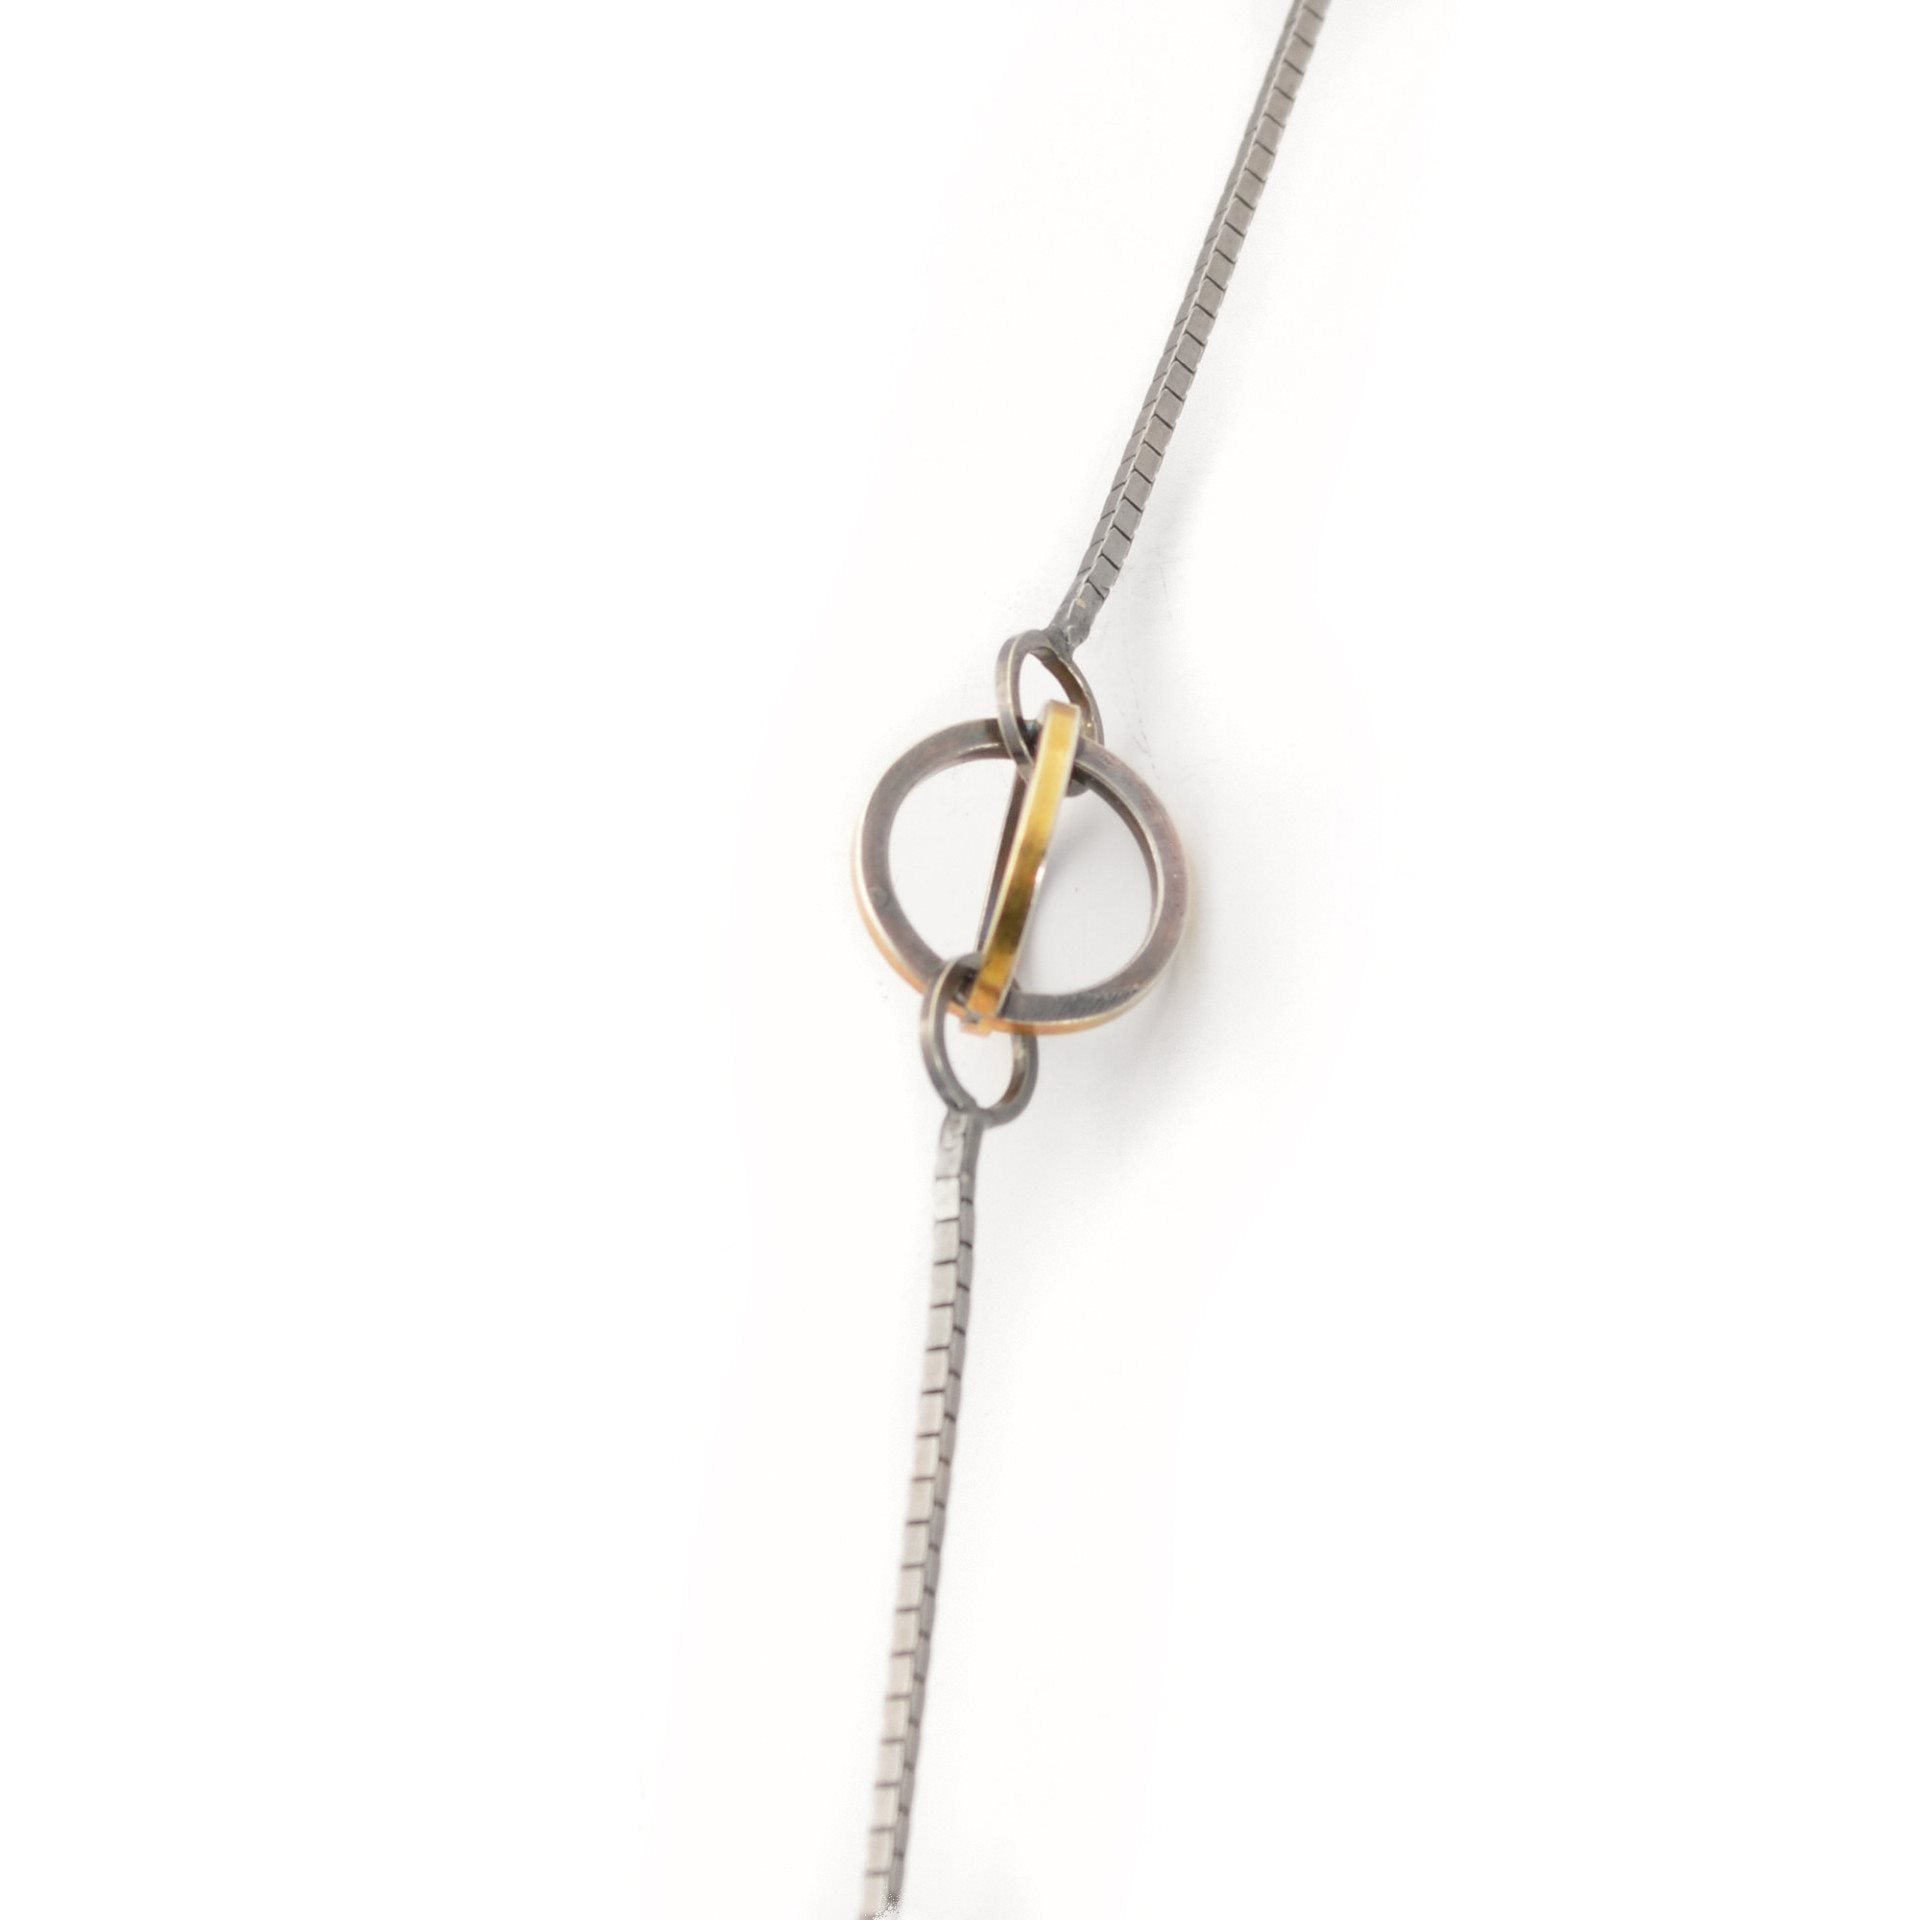 Blackened Sterling Silver and 22k Gold enhance the Geometric Shapes of this Lattis Long Necklace